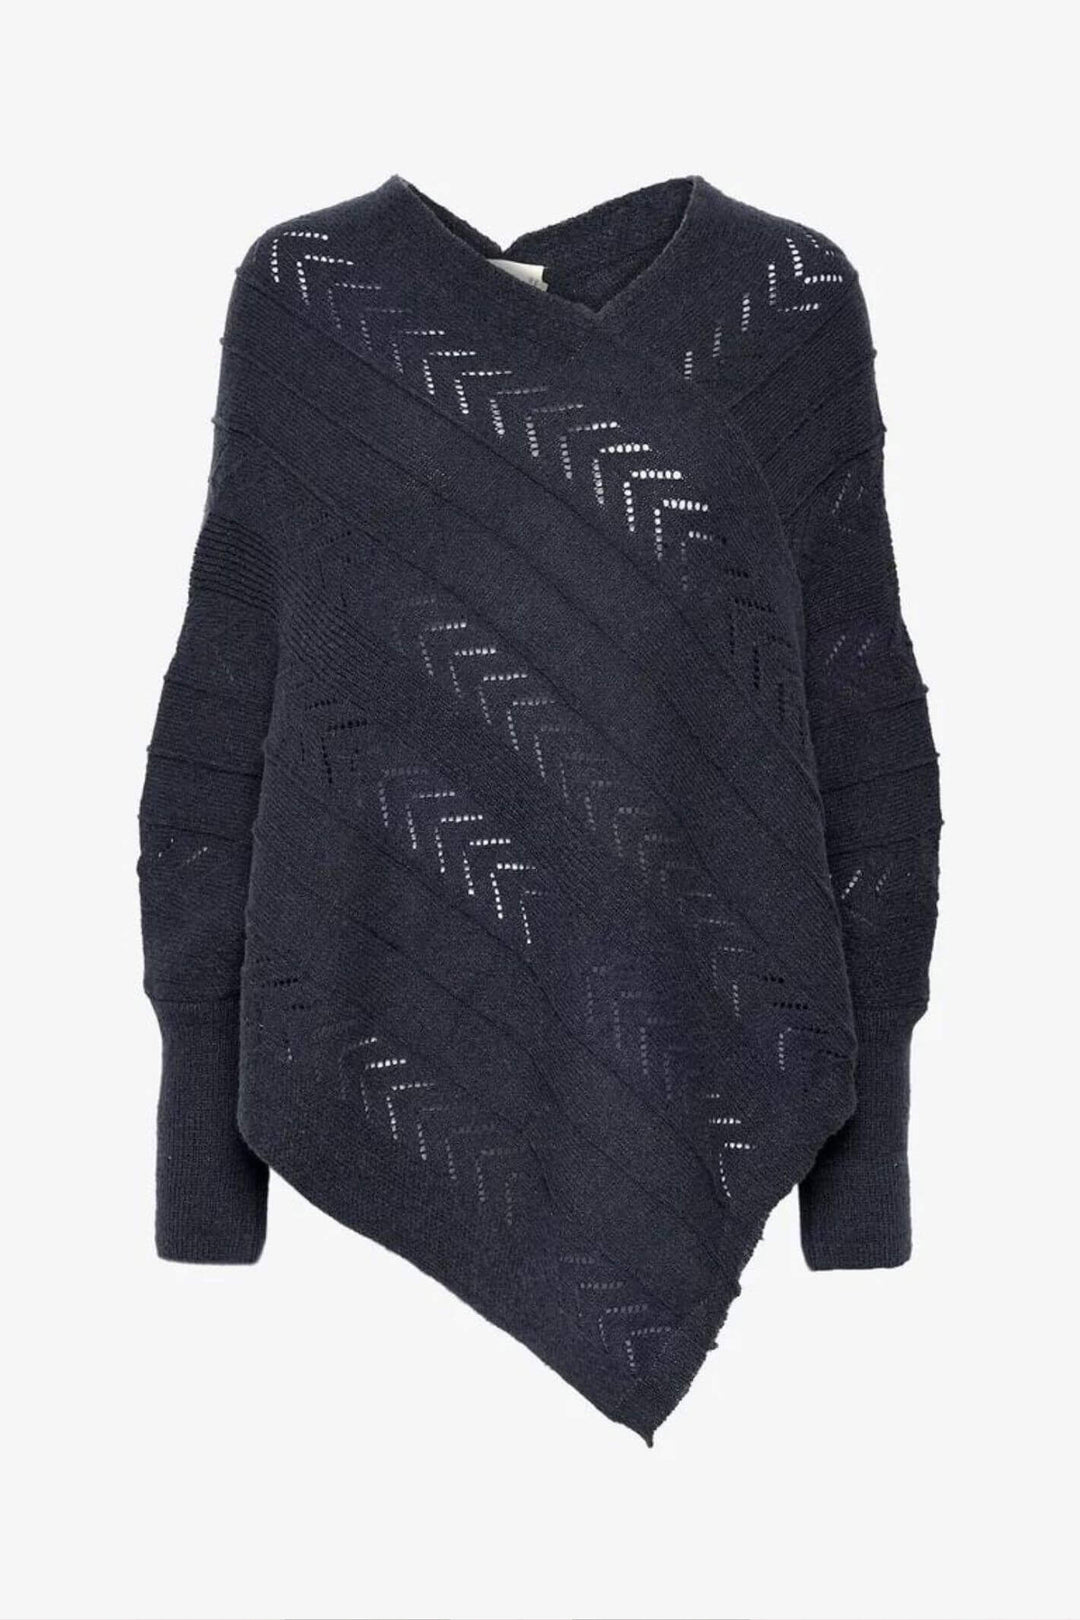 Cream Clothing CRHoliday Navy Knitted Poncho